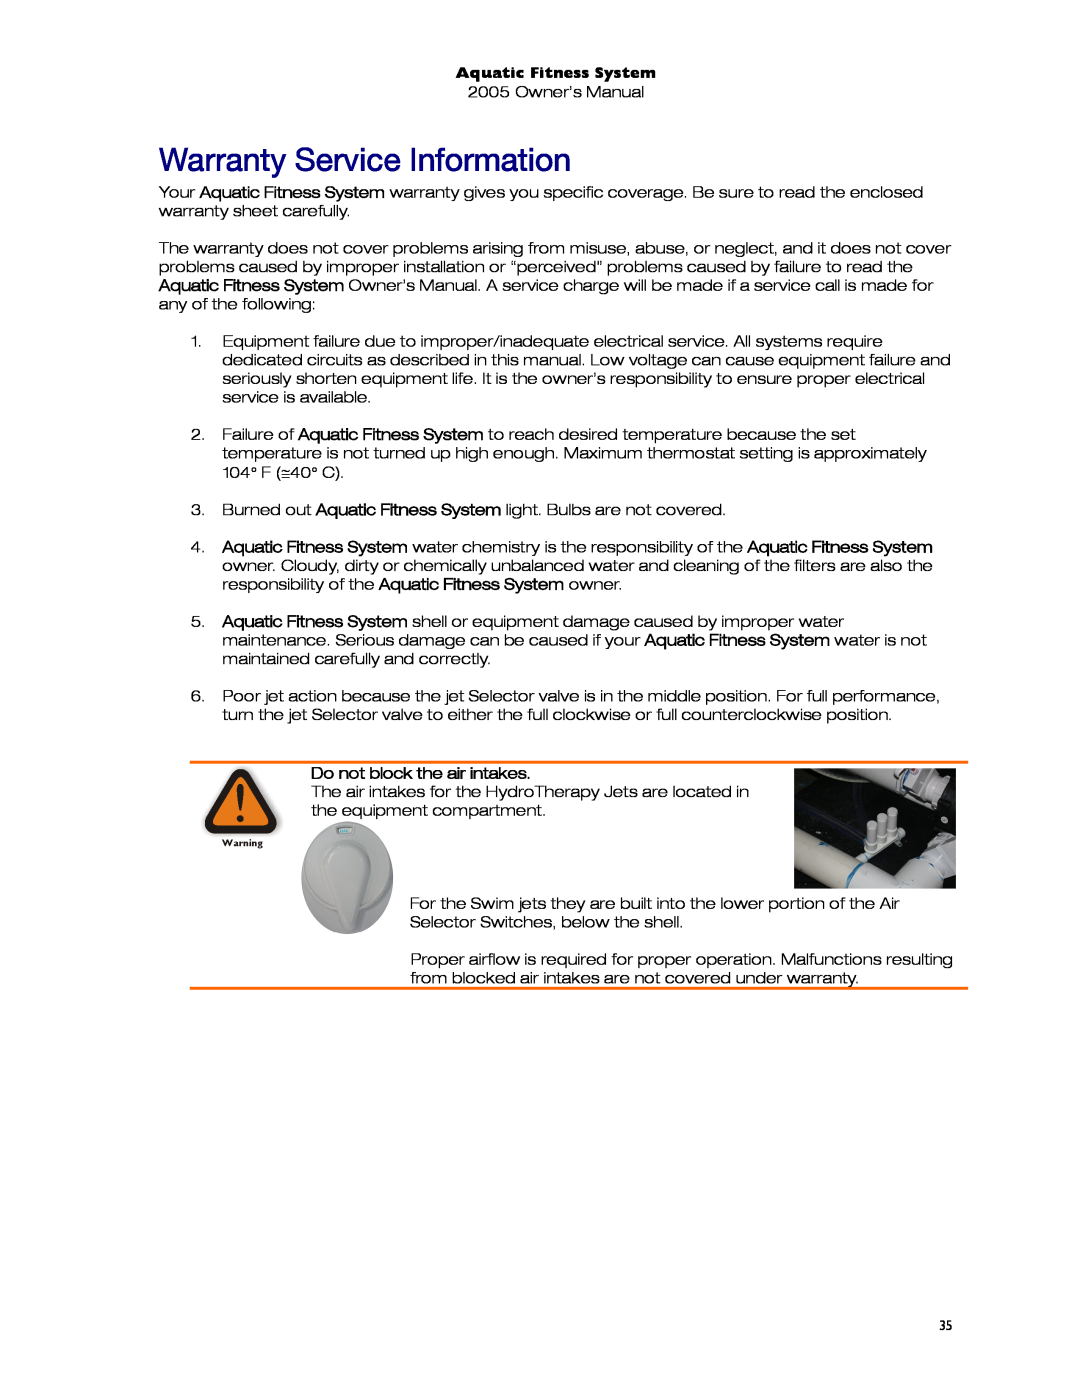 Dimension One Spas 01513-192 manual Warranty Service Information, Do not block the air intakes, Aquatic Fitness System 